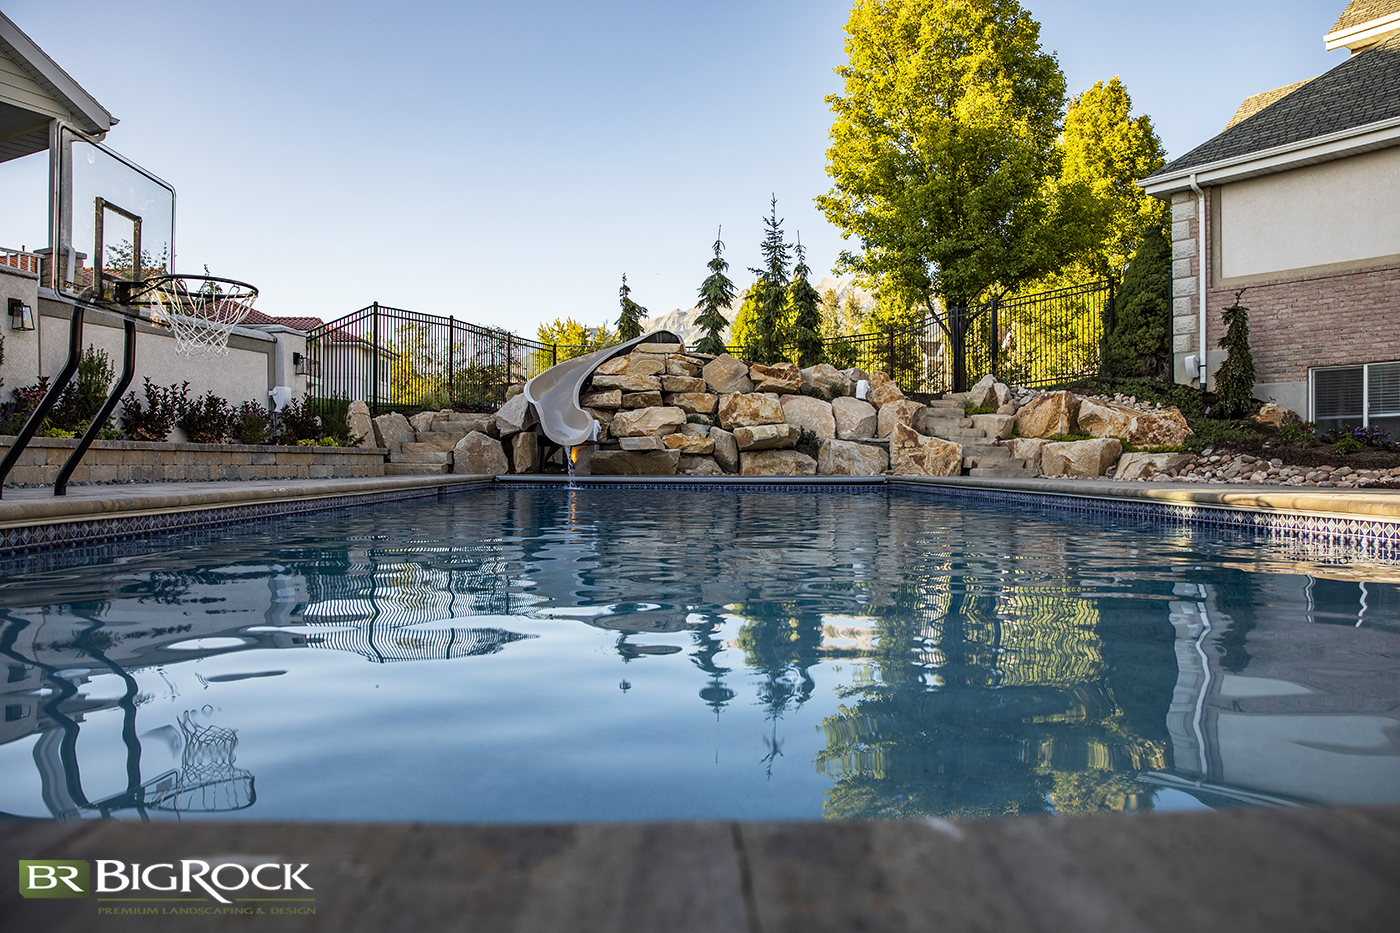 Your backyard pool doesn't have to be boring. Create design interest with natural rock walls and slide installation.